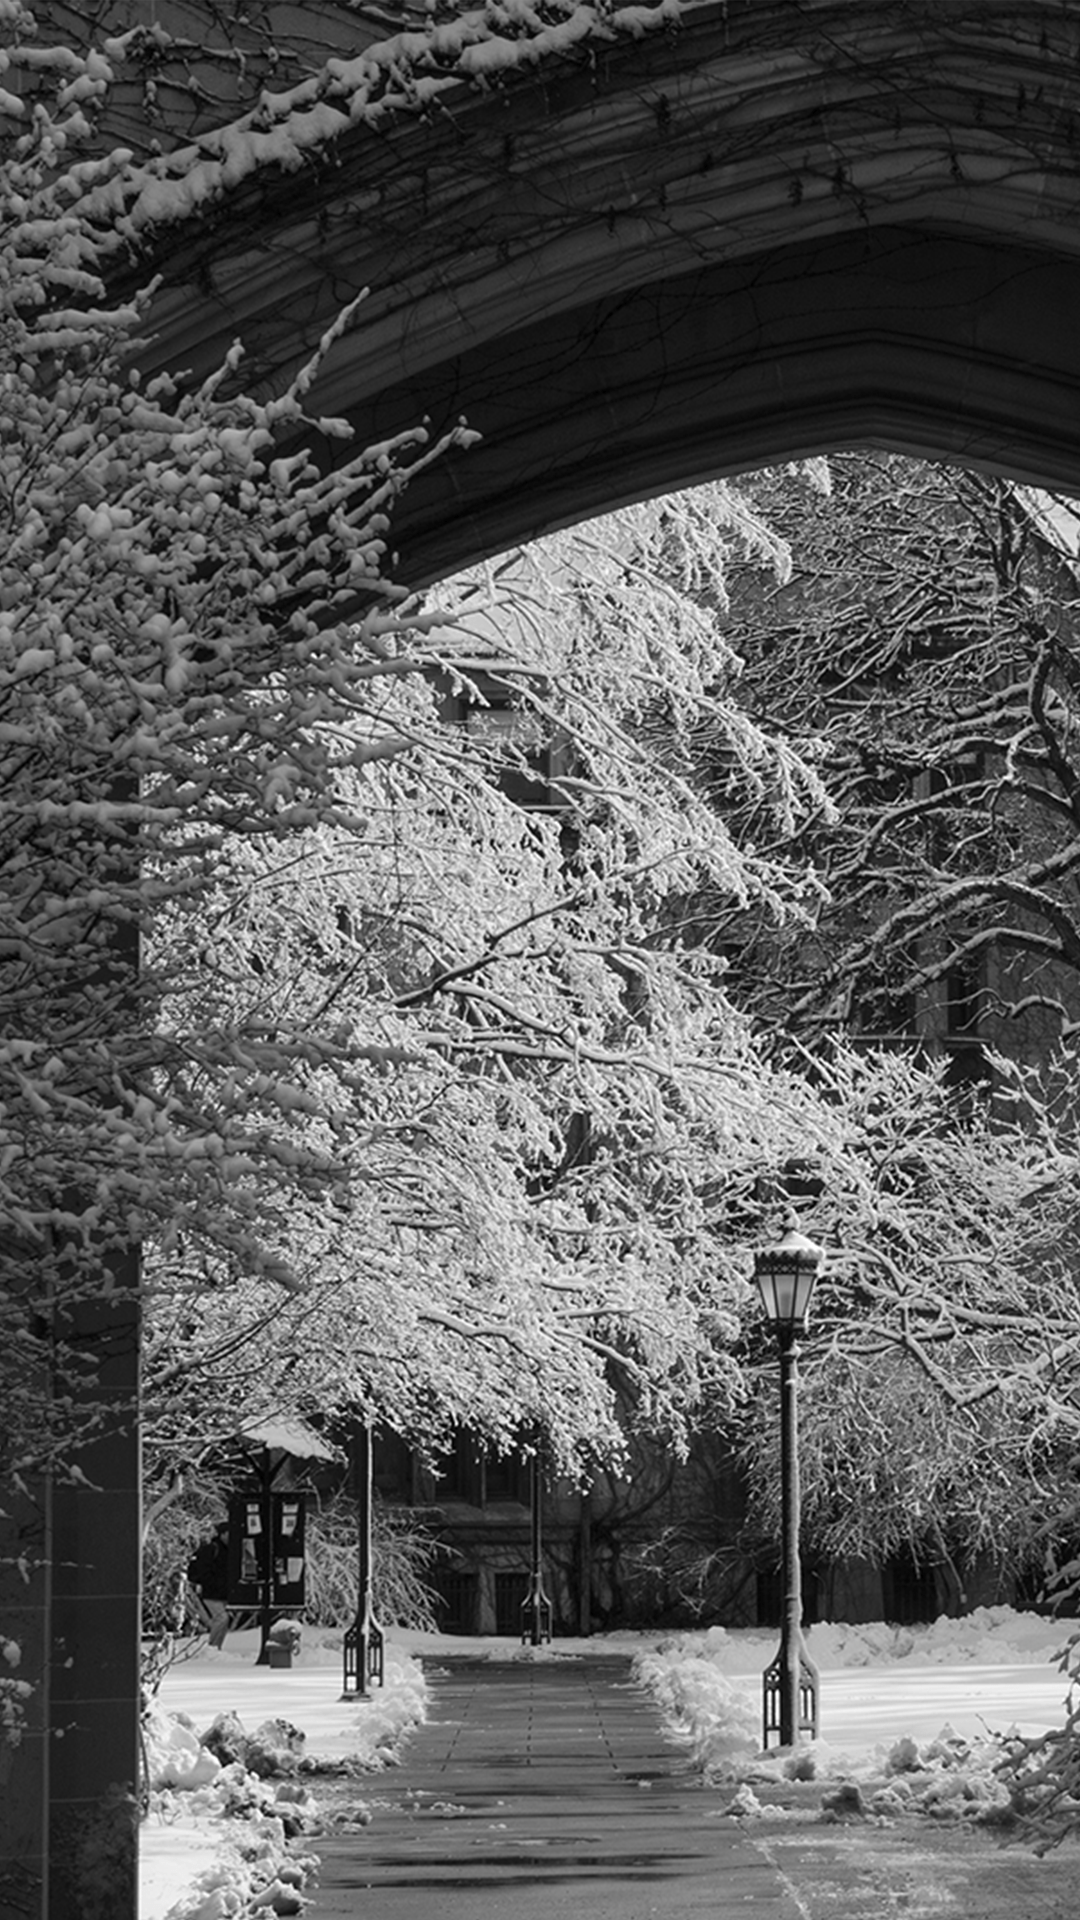 Snowy trees viewed through a stone arch.